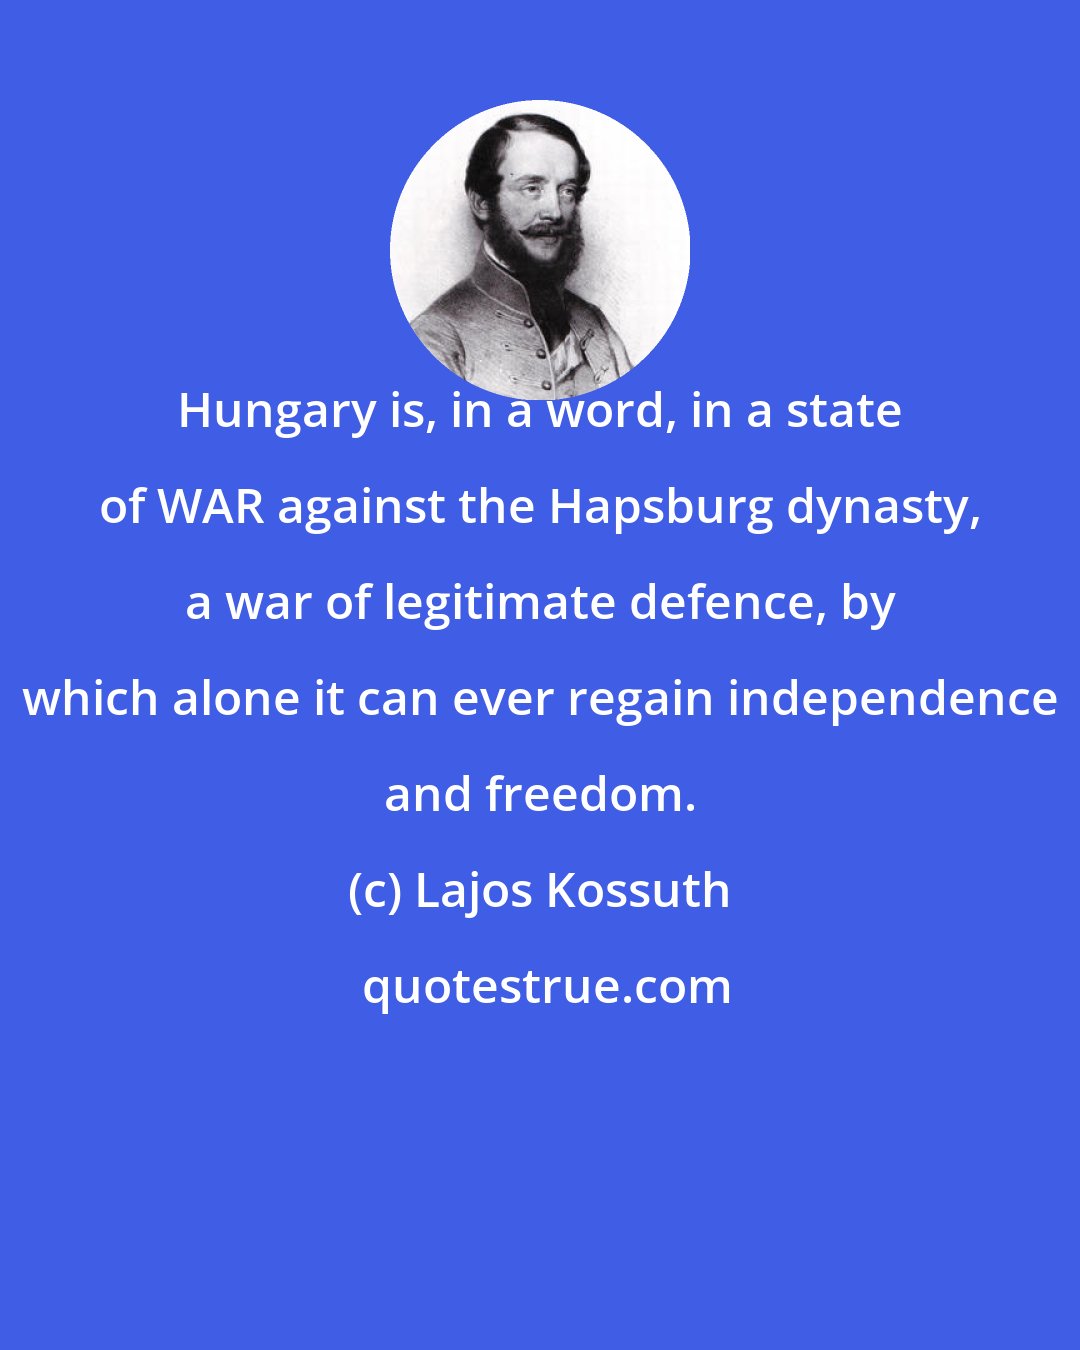 Lajos Kossuth: Hungary is, in a word, in a state of WAR against the Hapsburg dynasty, a war of legitimate defence, by which alone it can ever regain independence and freedom.